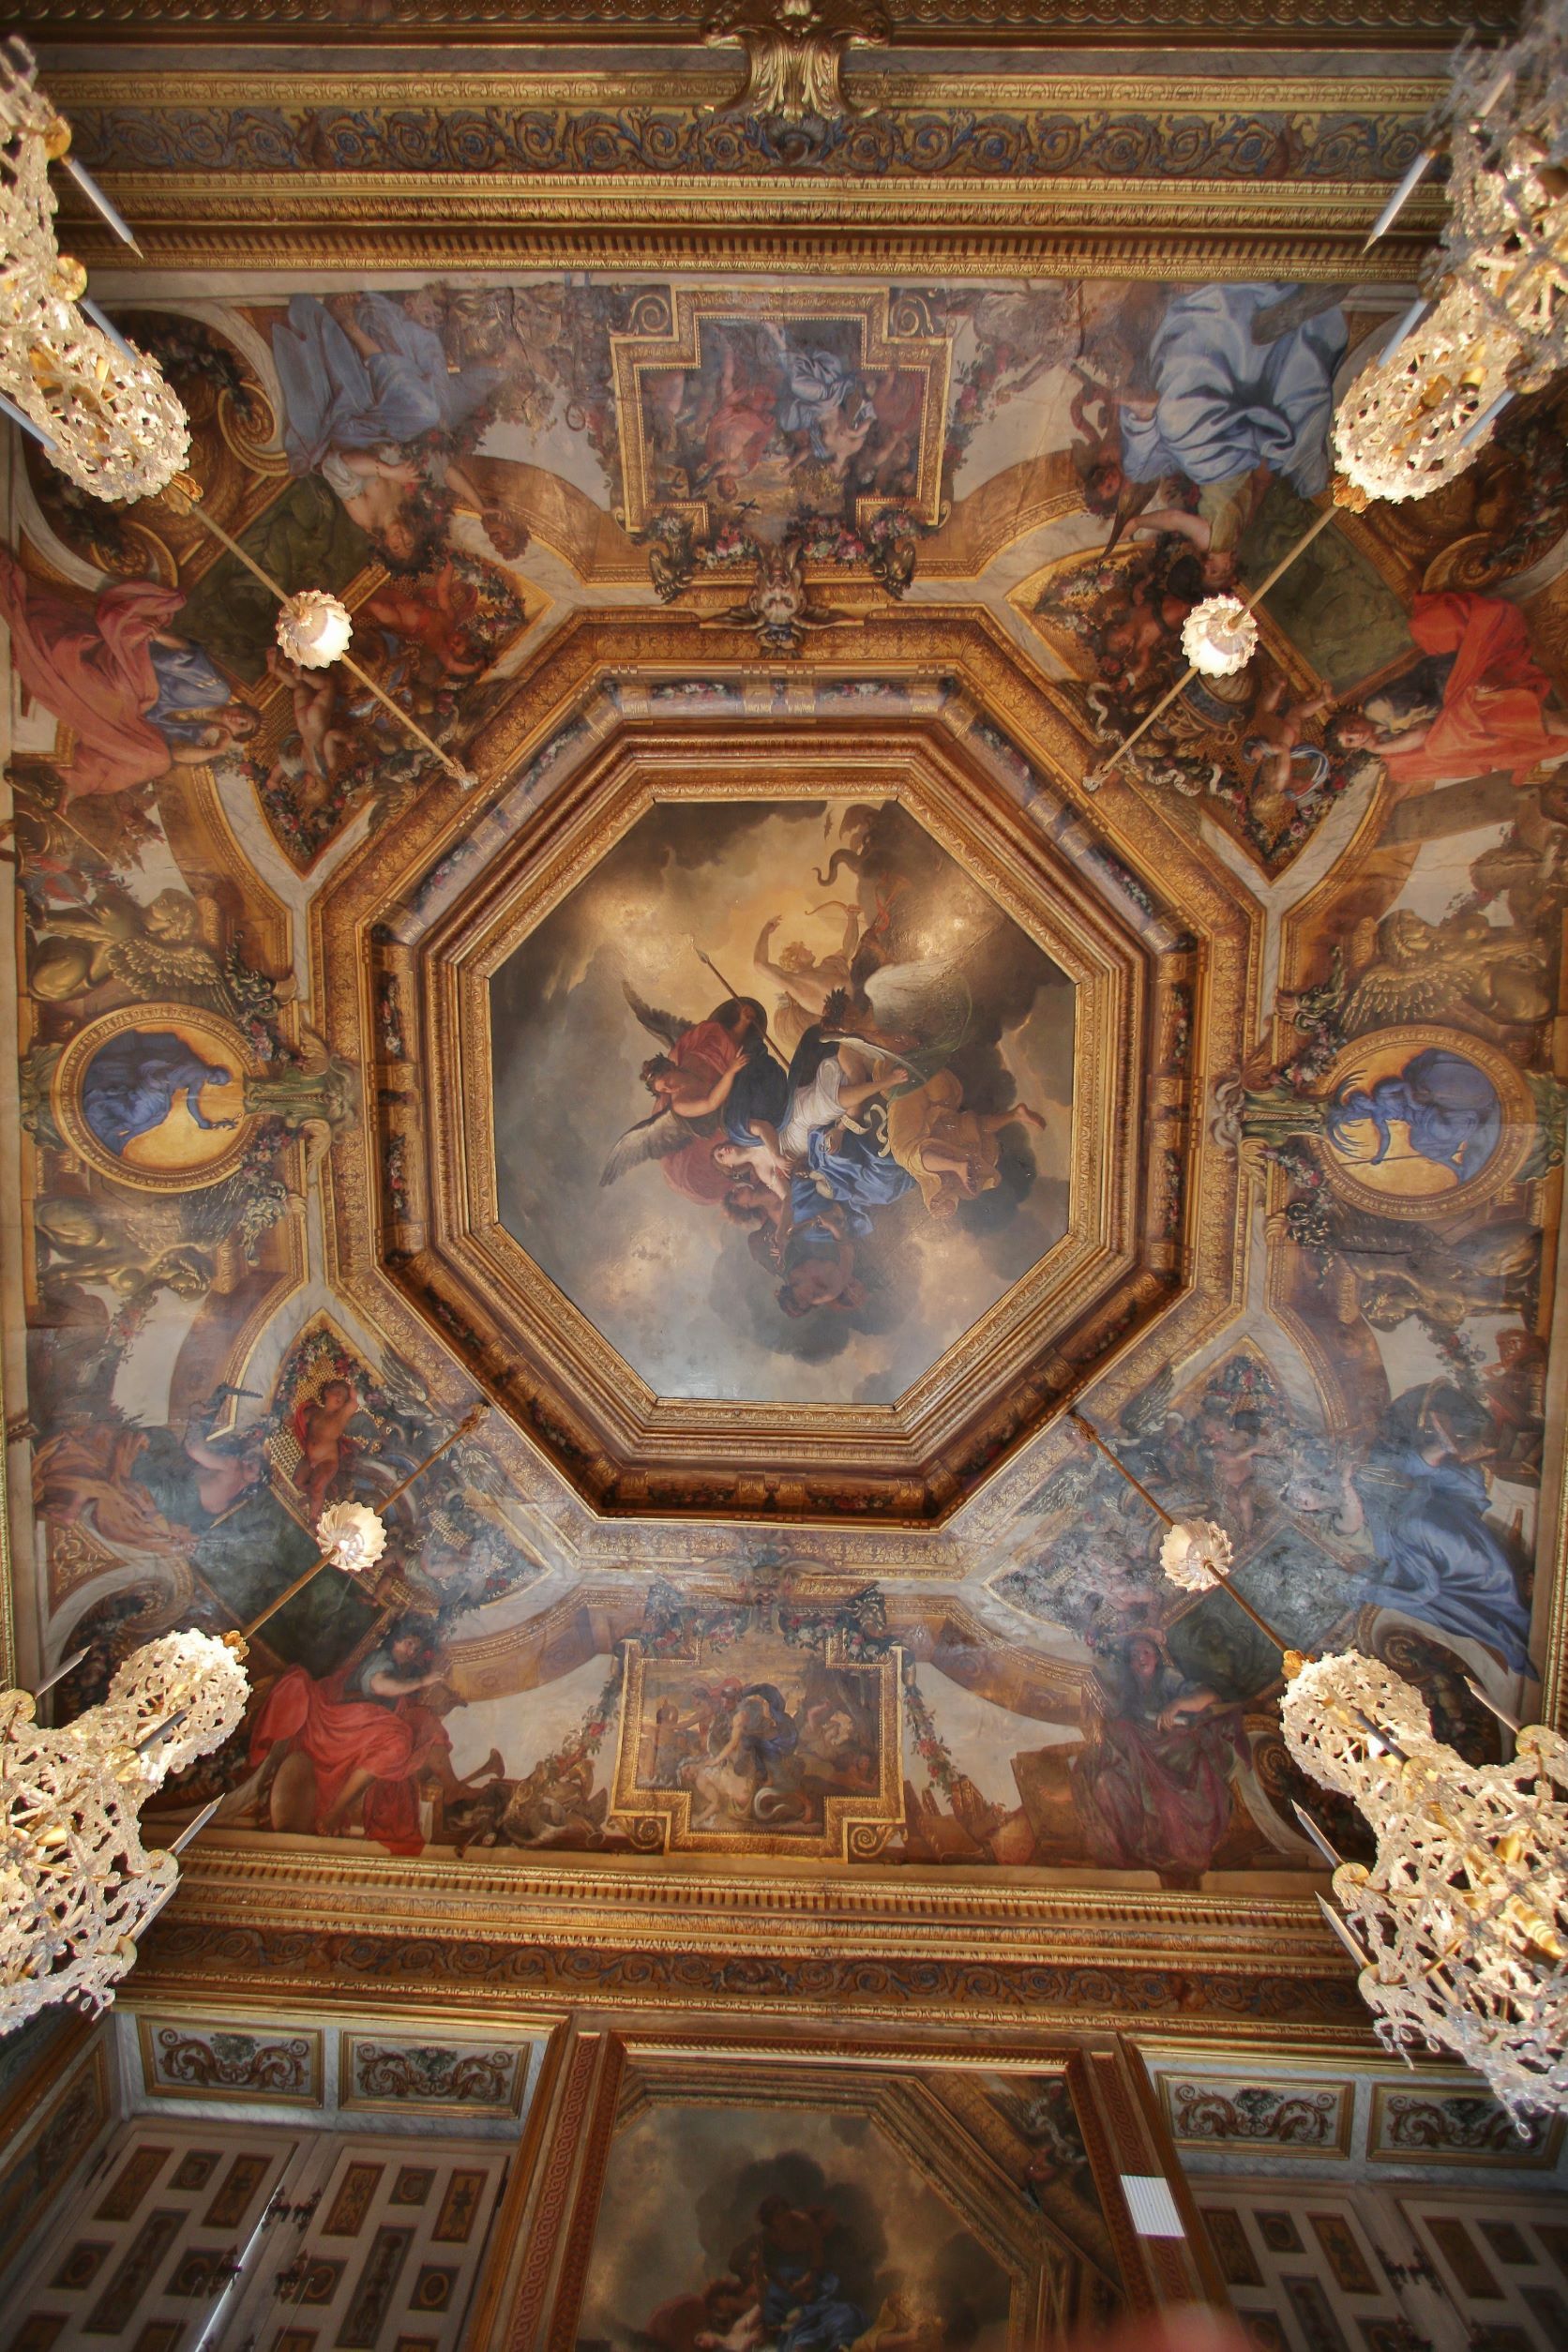 Visit the king's room in Fontainebleau castle